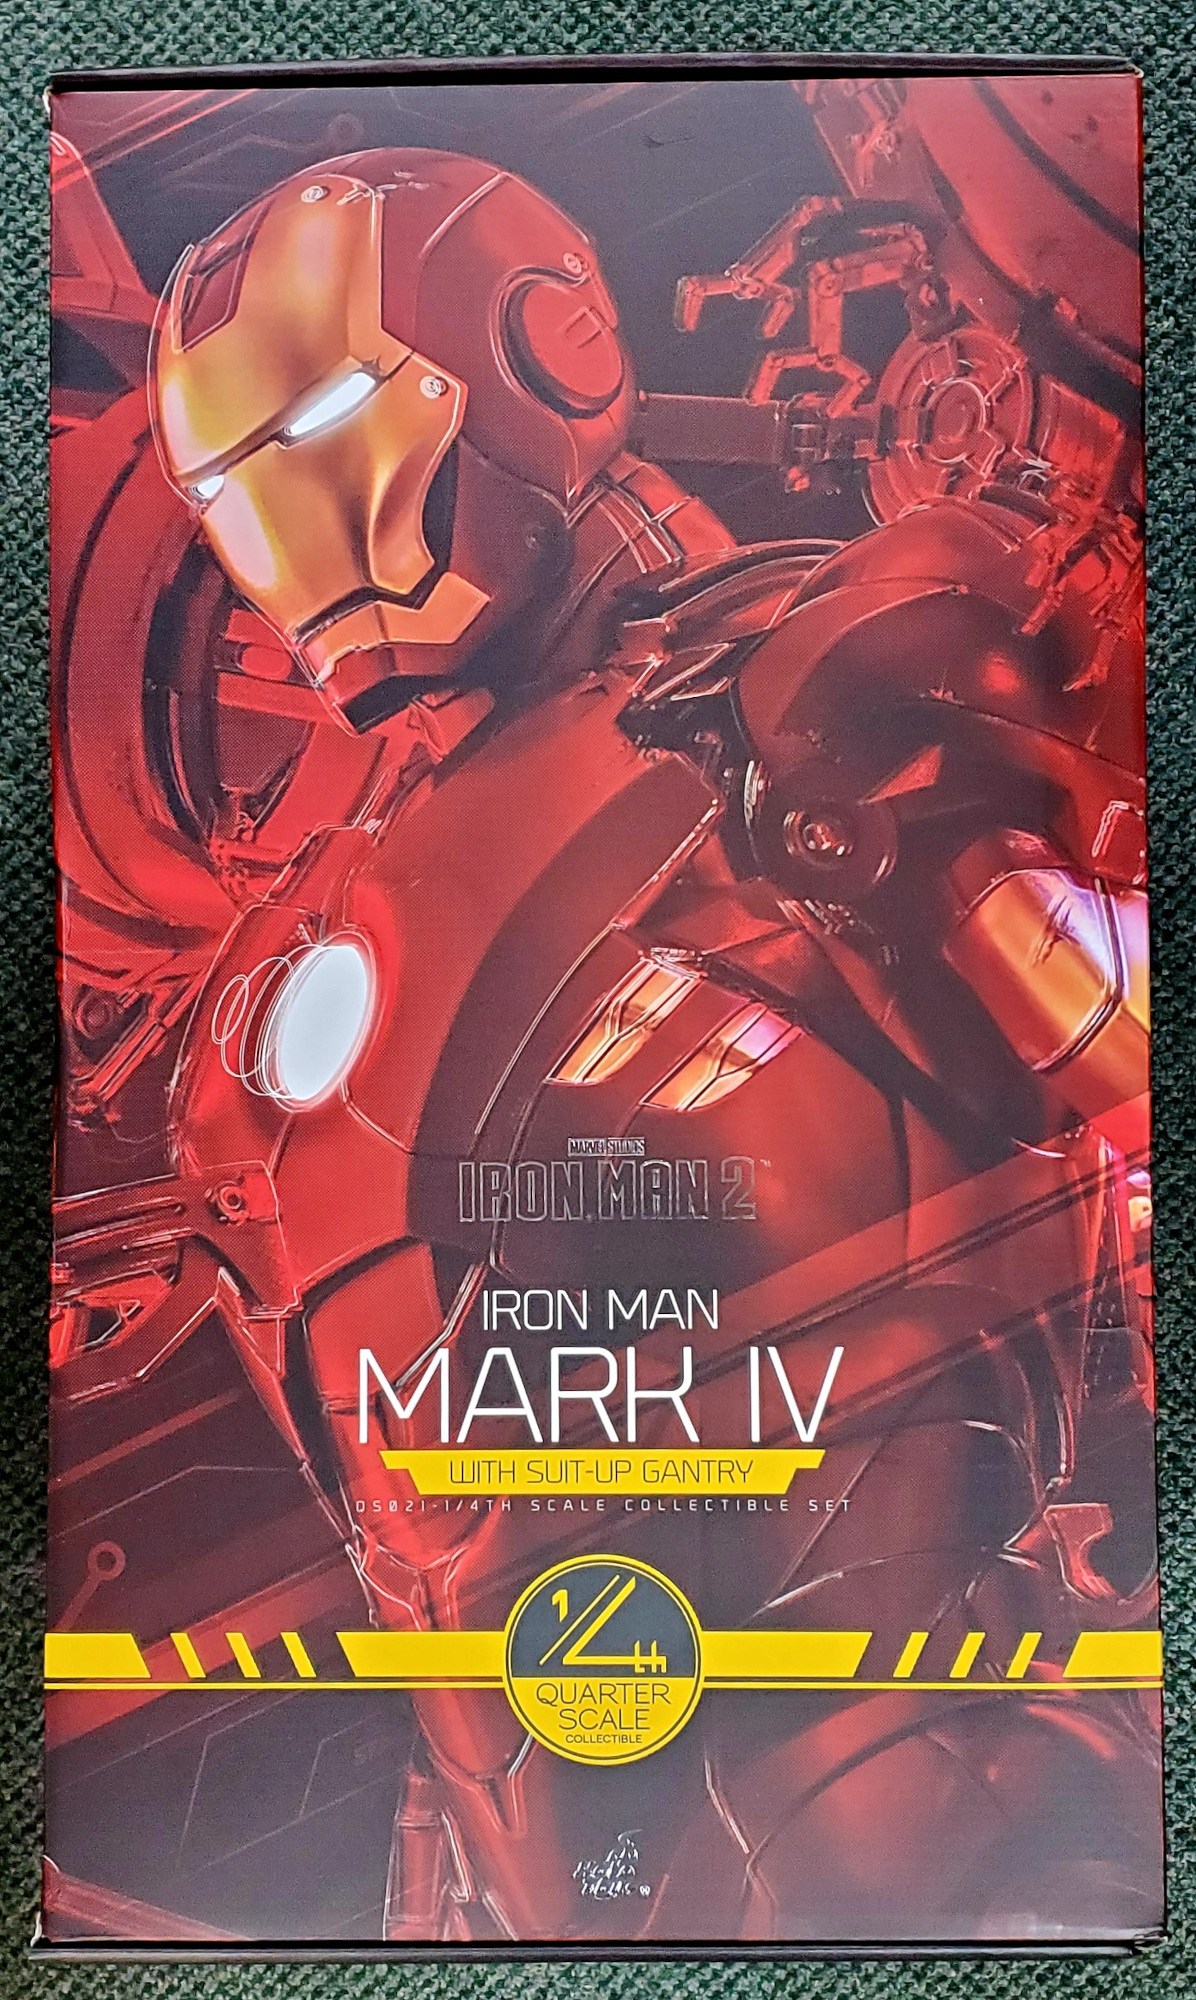 Hot Toys Iron Man 2 Mark IV with Suit-Up Gantry 1:4 Scale Figure 1